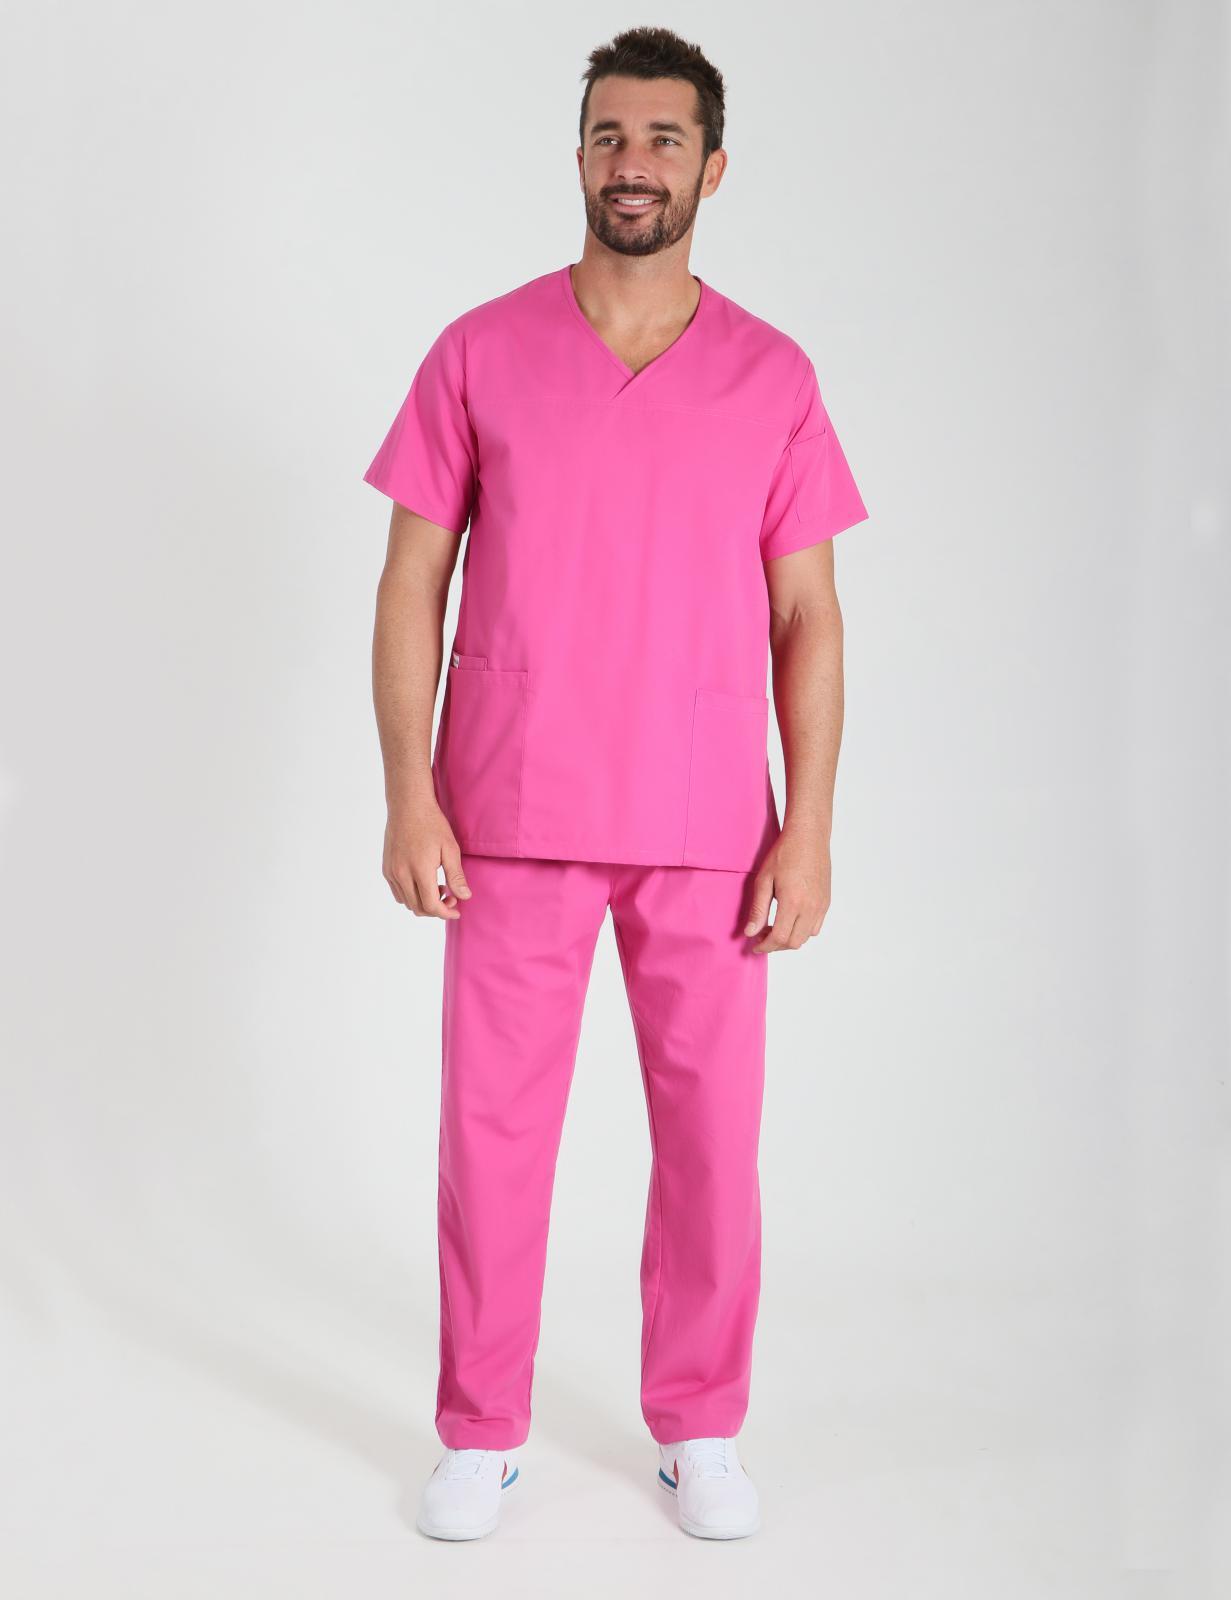 Men's Fit Solid Scrub Top - Pink - 3X Large - 0